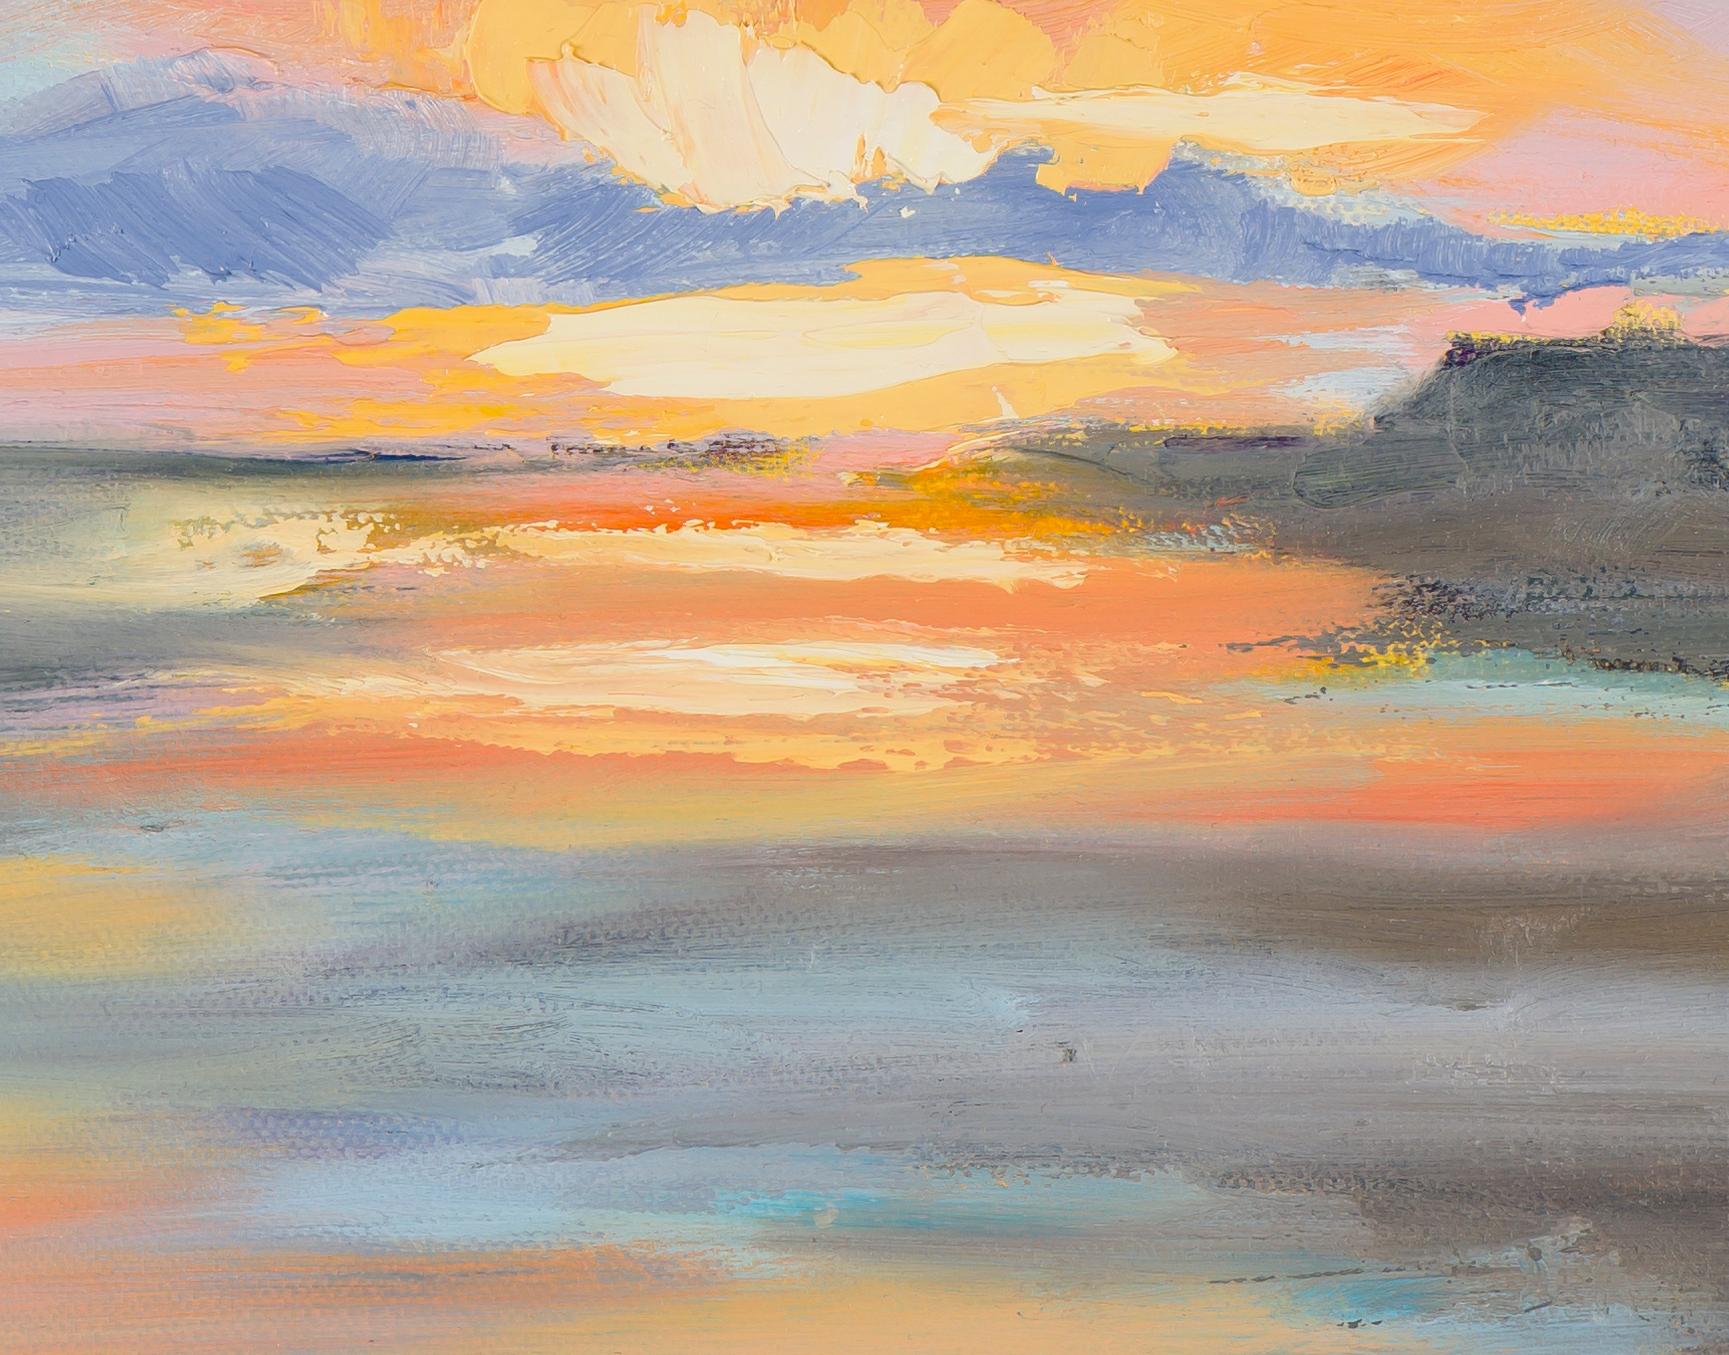 Pastel Clouds Over Folly Beach, Original Contemporary Landscape Painting
20